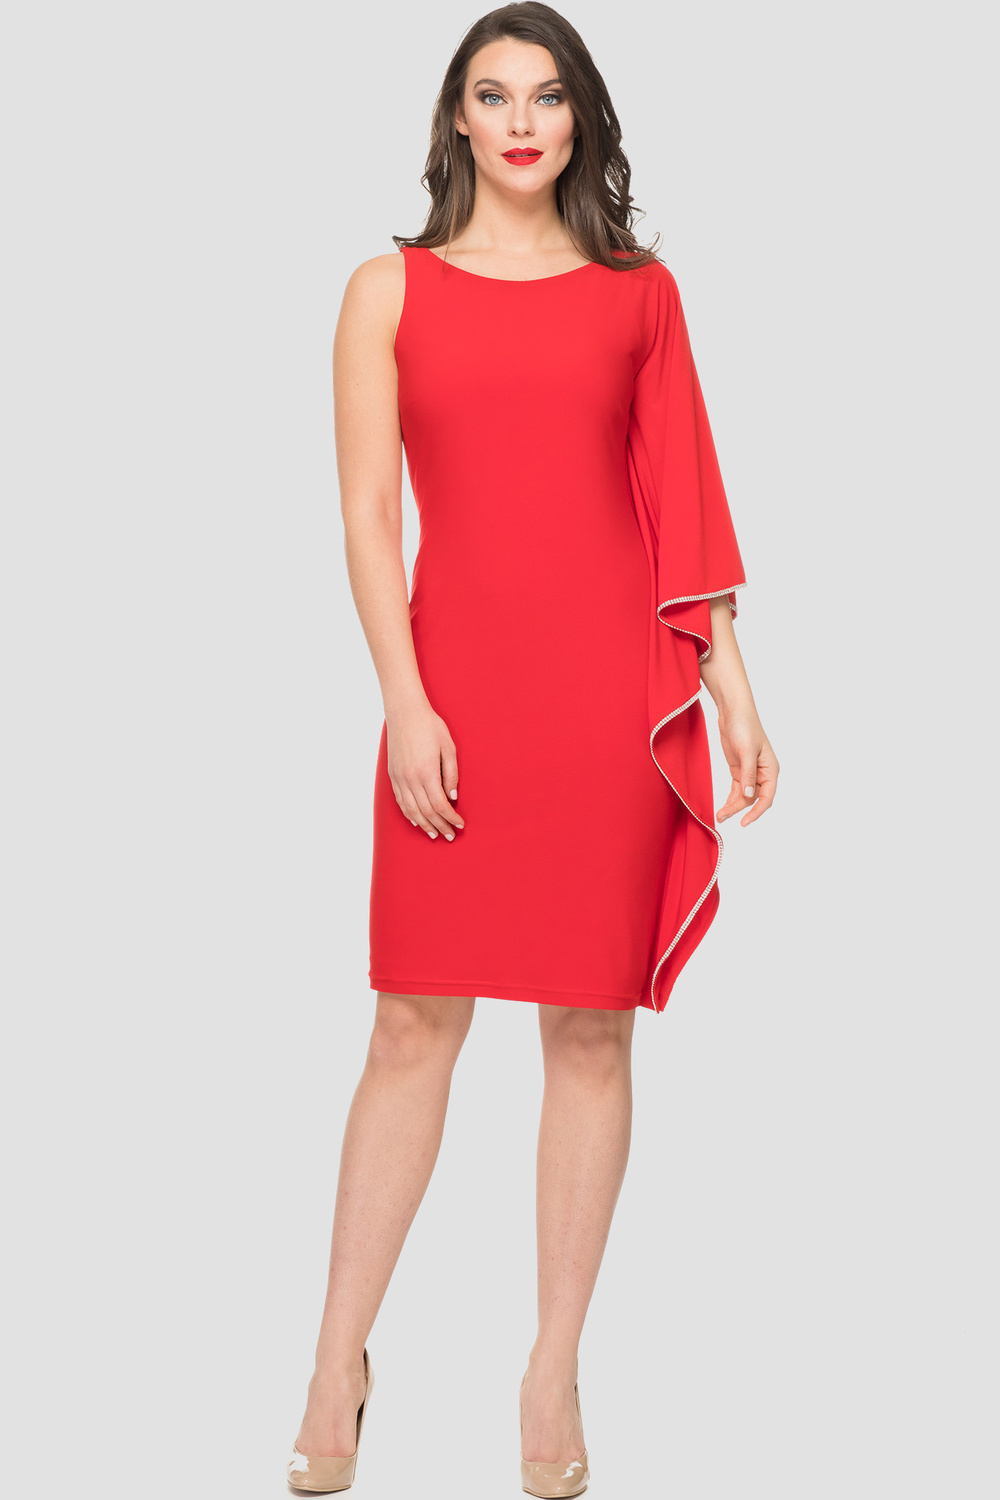 Joseph Ribkoff robe style 191022. Rouge A Levres 173